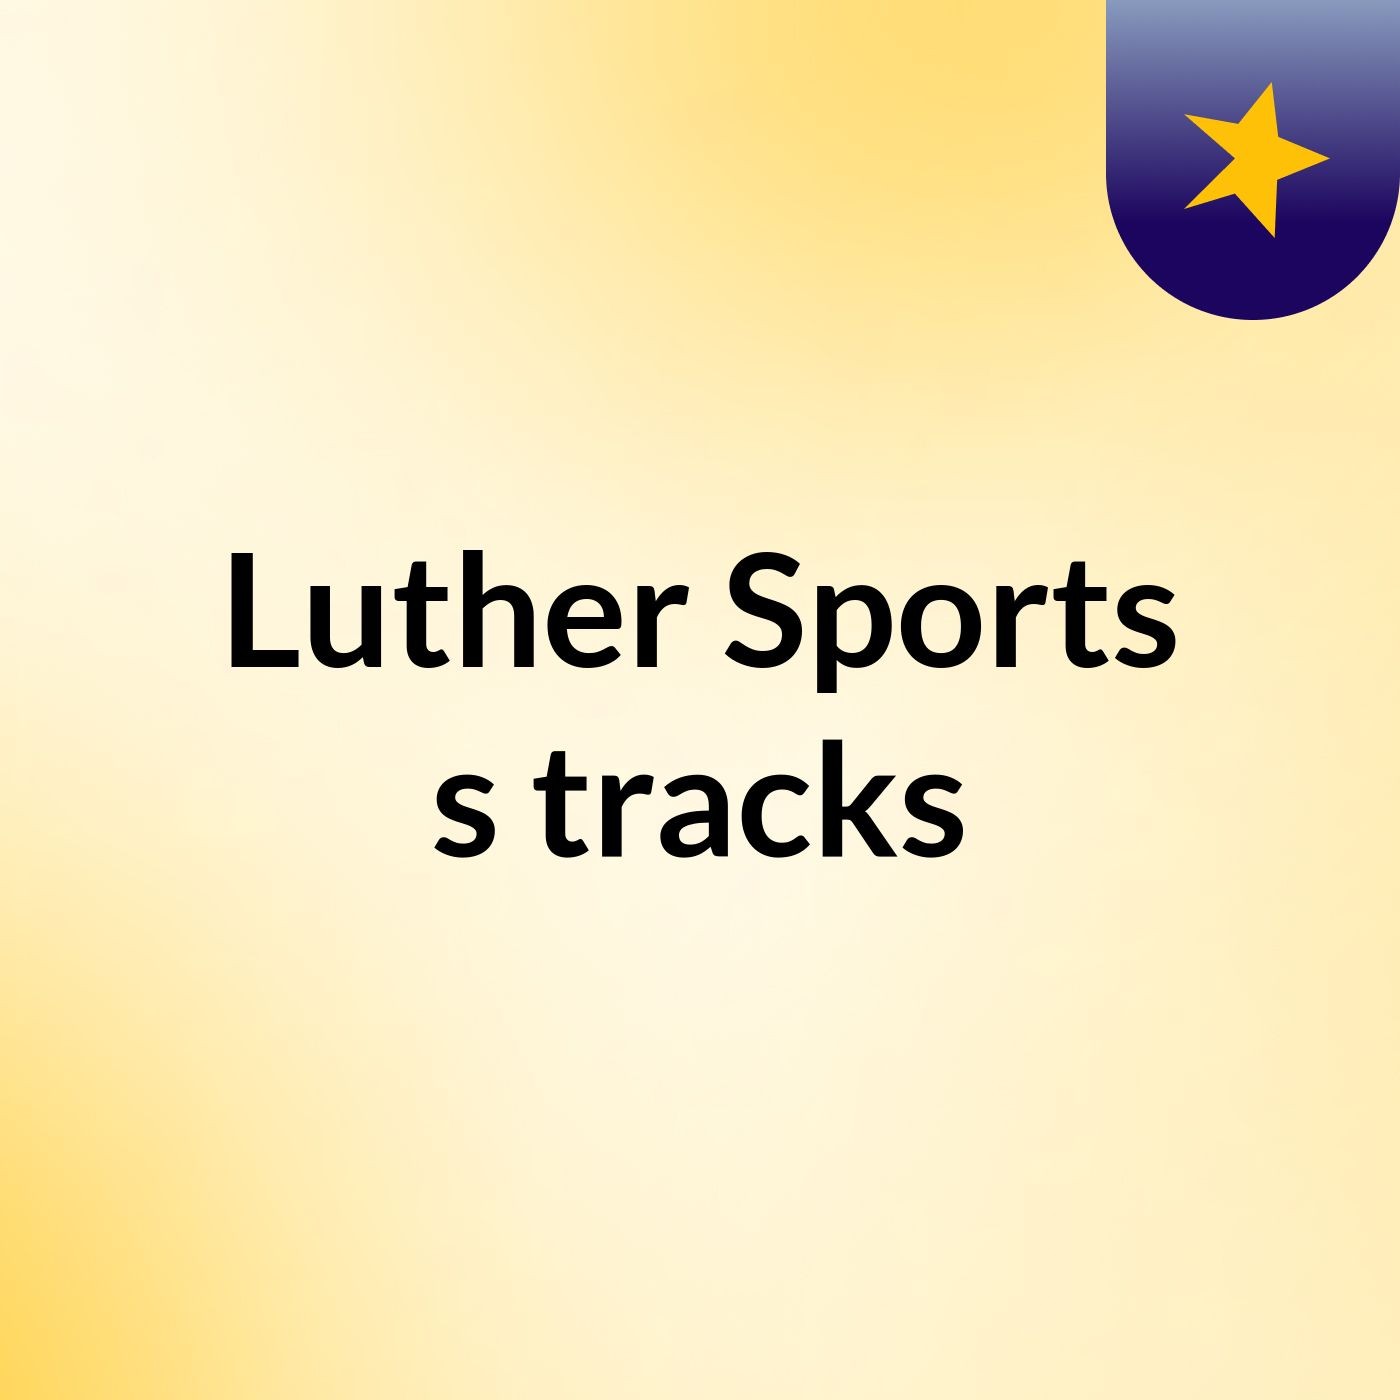 Luther Sports's tracks